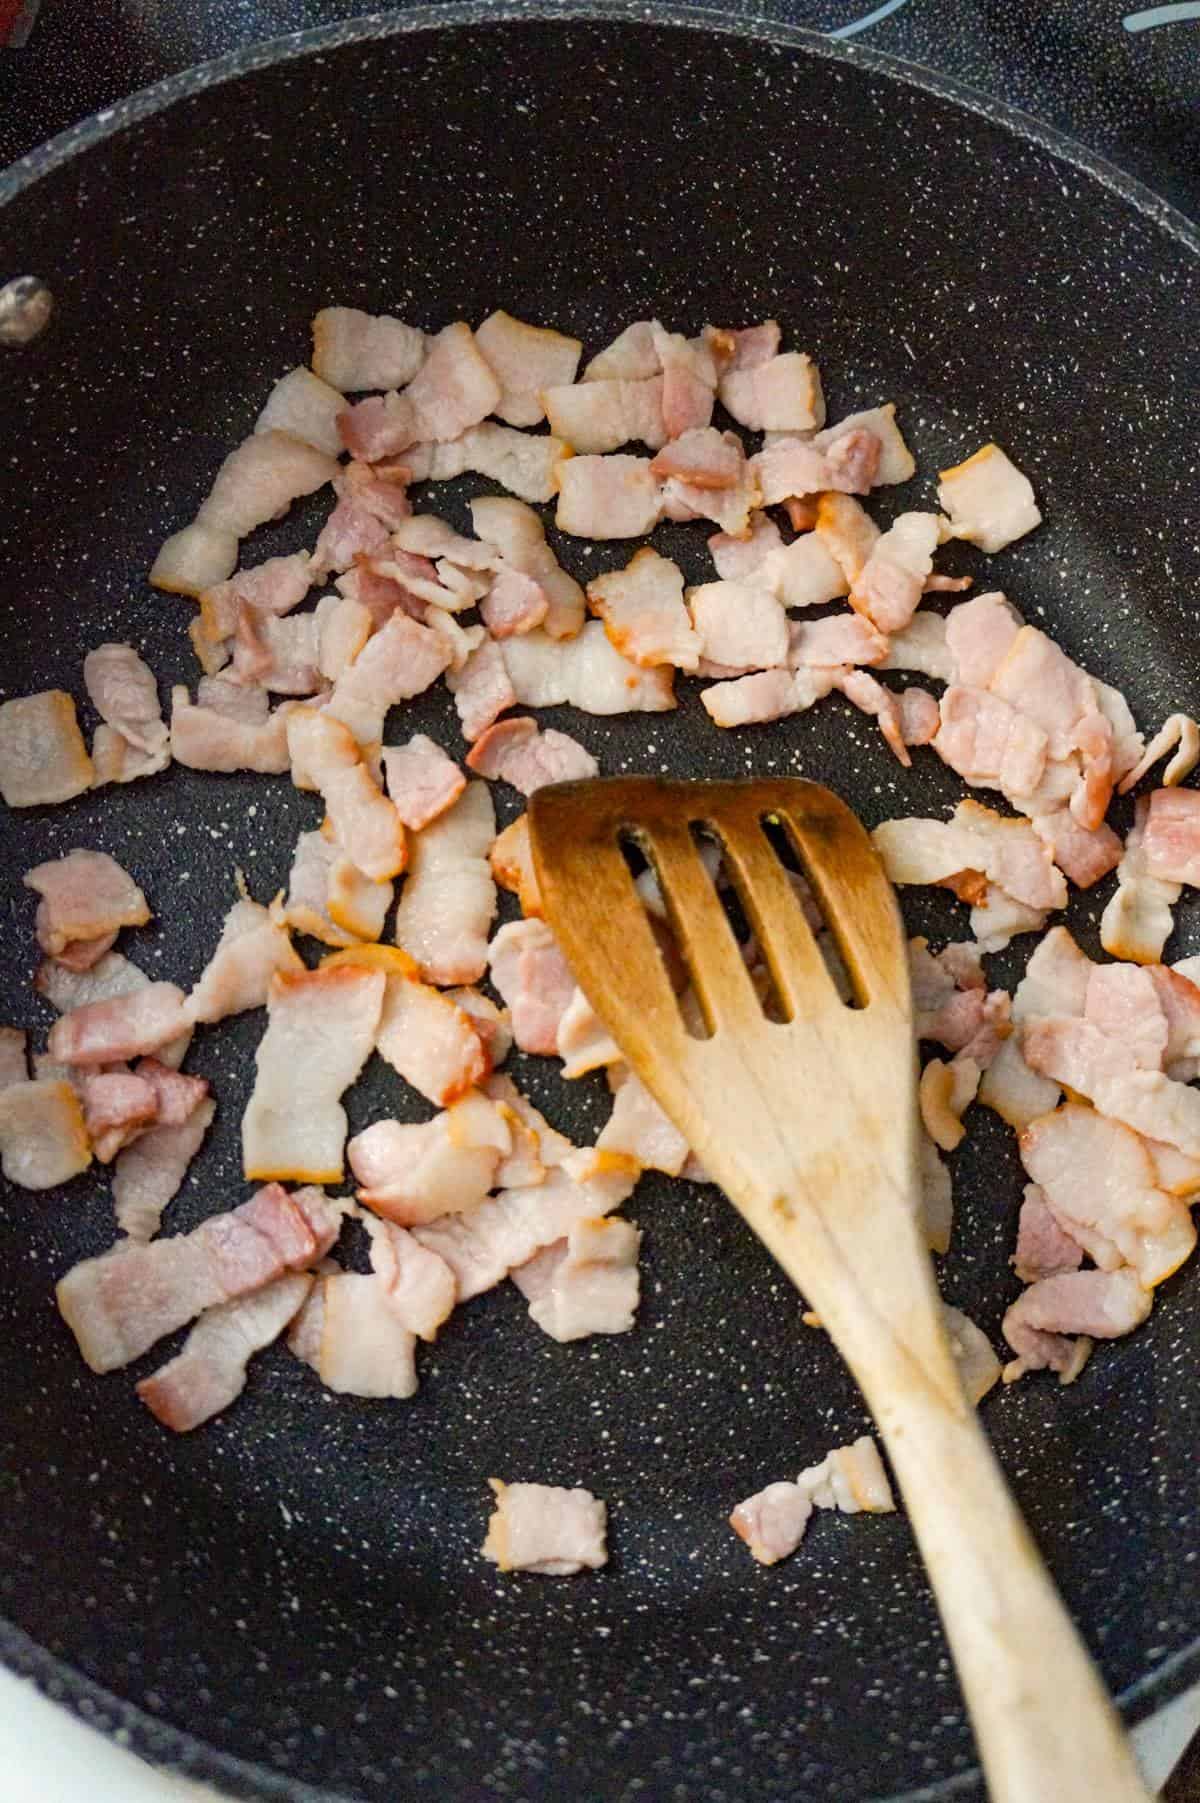 diced bacon pieces cooking in a saute pan